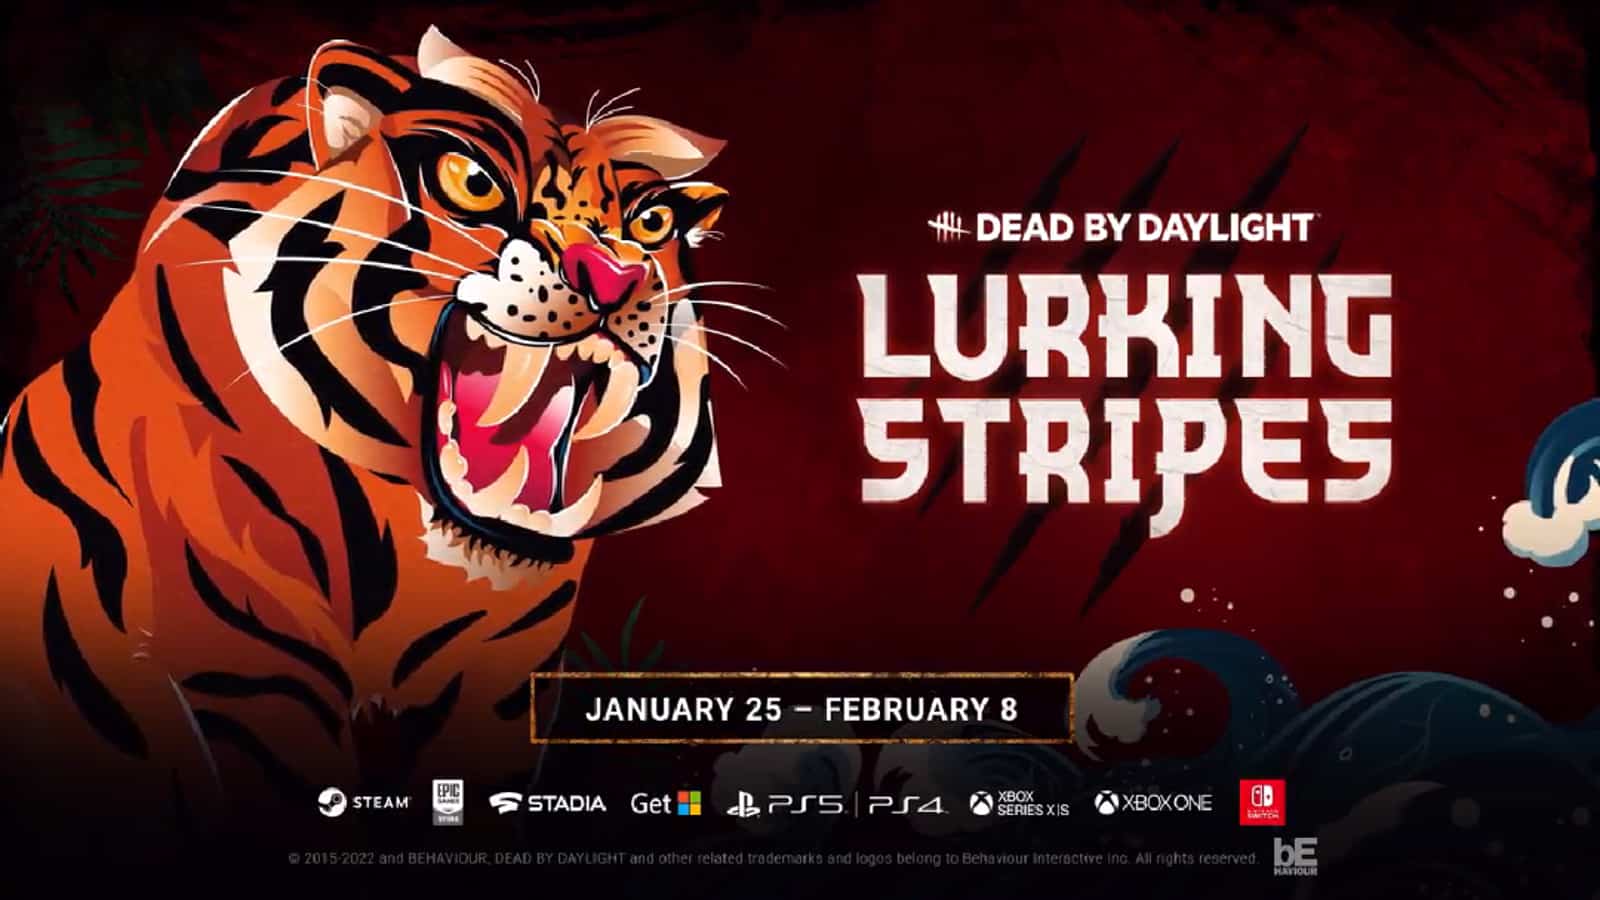 the Dead by Daylight Lunar Stripes event brings a new vibe to DBD